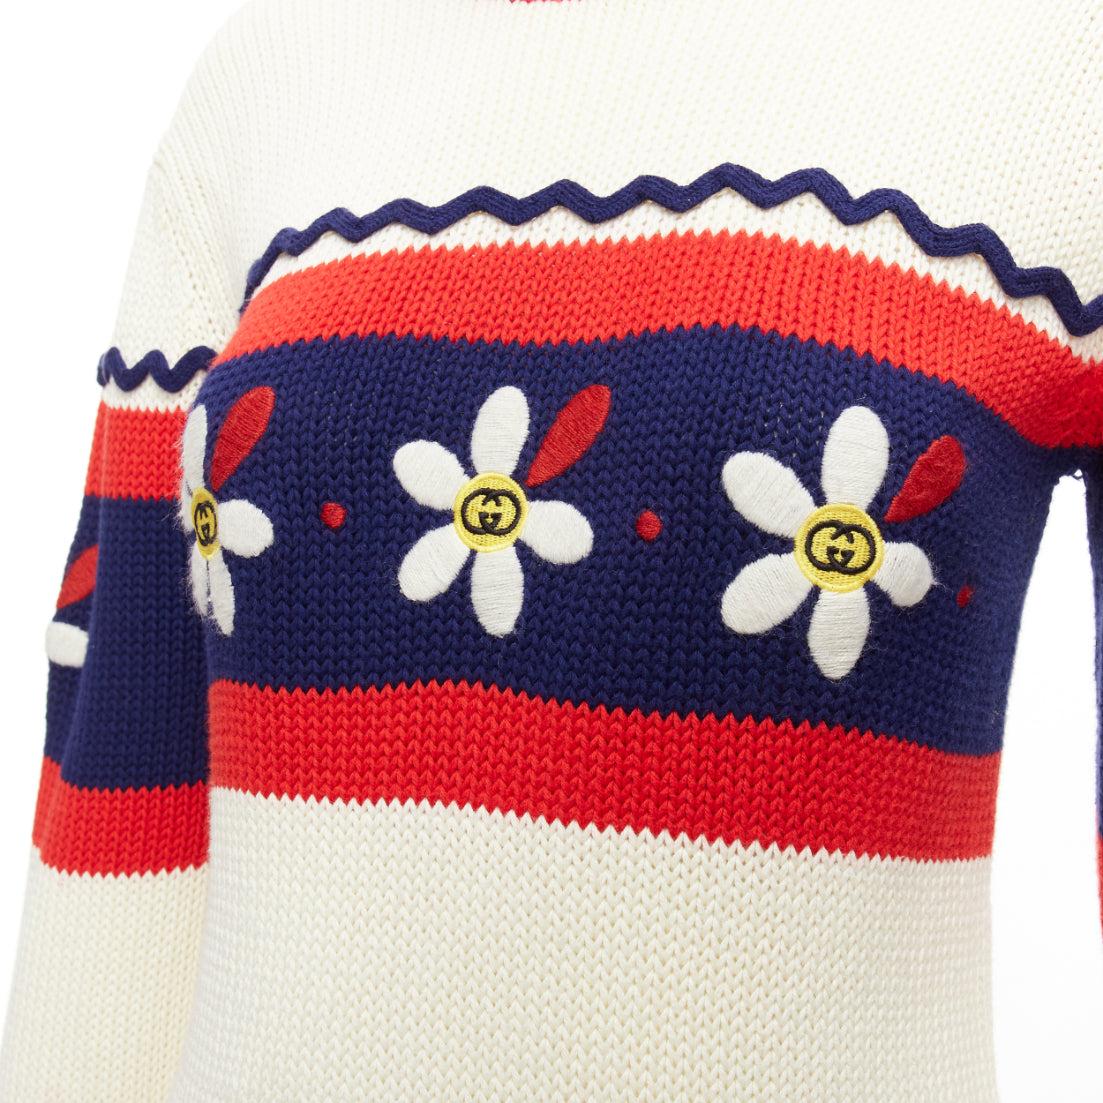 GUCCI Kids cream blue red cotton GG logo daisy bateau sweater I2Y XS
Reference: KYCG/A00011
Brand: Gucci
Collection: Kids
Material: Cotton
Color: Cream, Red
Pattern: Logomania
Closure: Button
Extra Details: Shoulder button closure.
Made in: